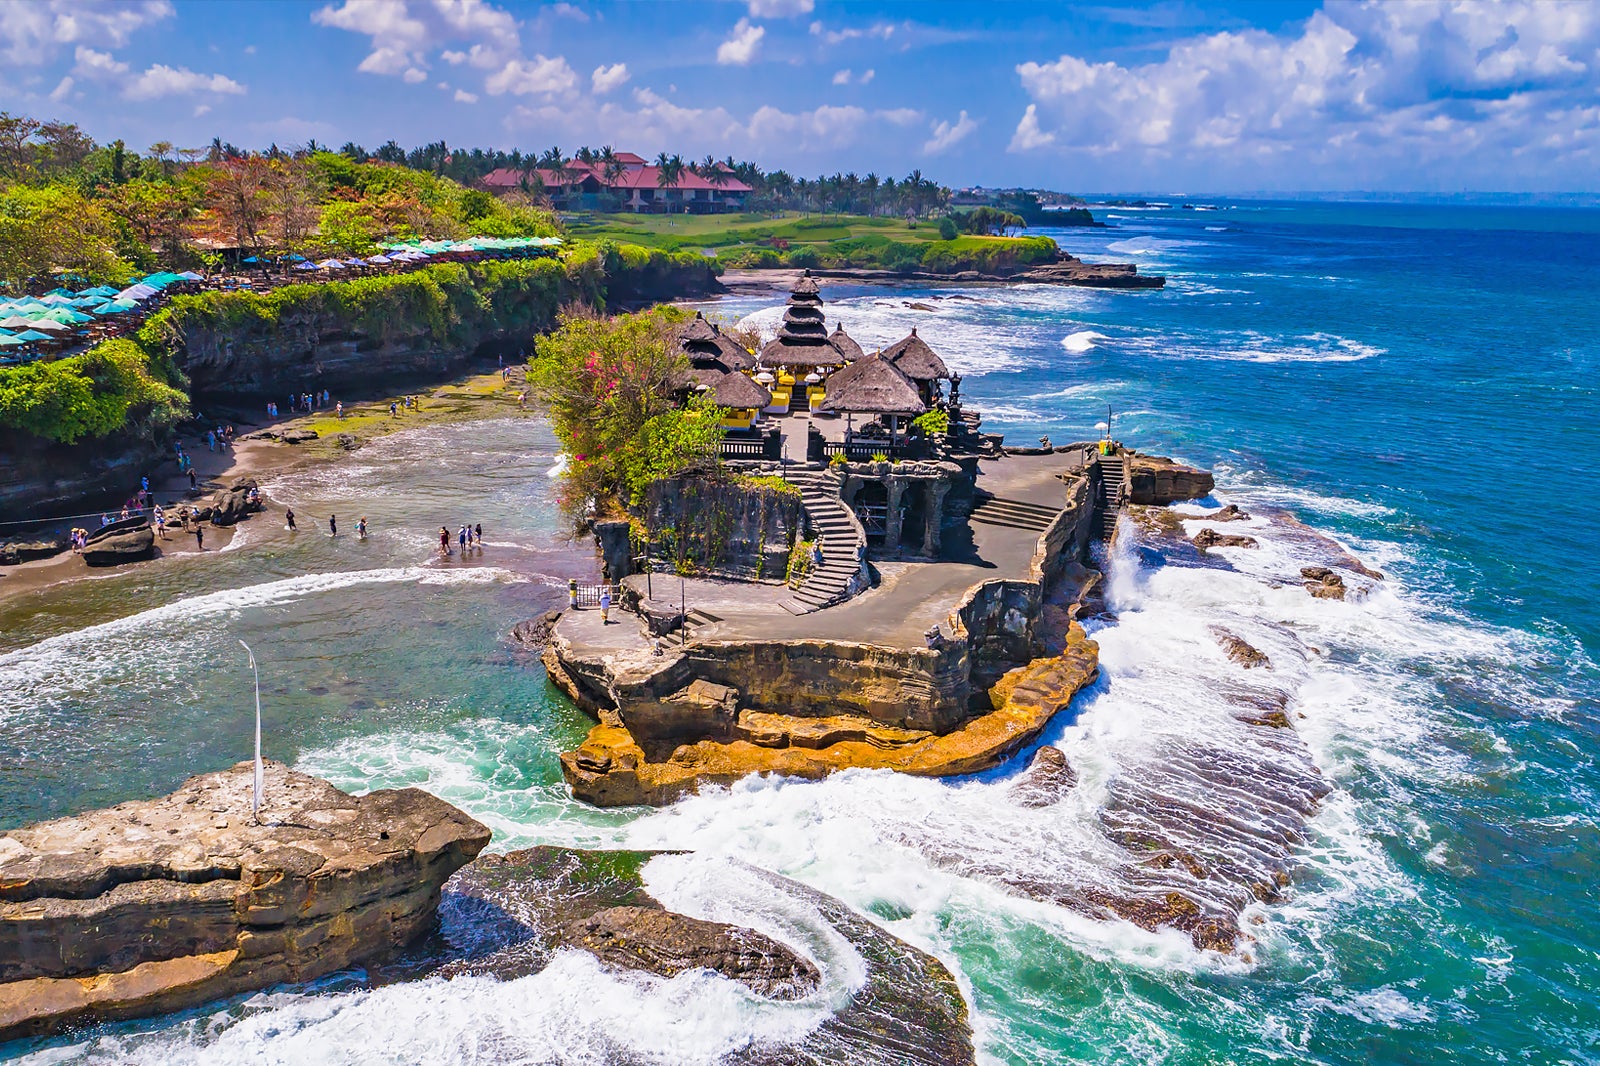 Travelogue: One of the World's Best Destinations Is Bali, Indonesia